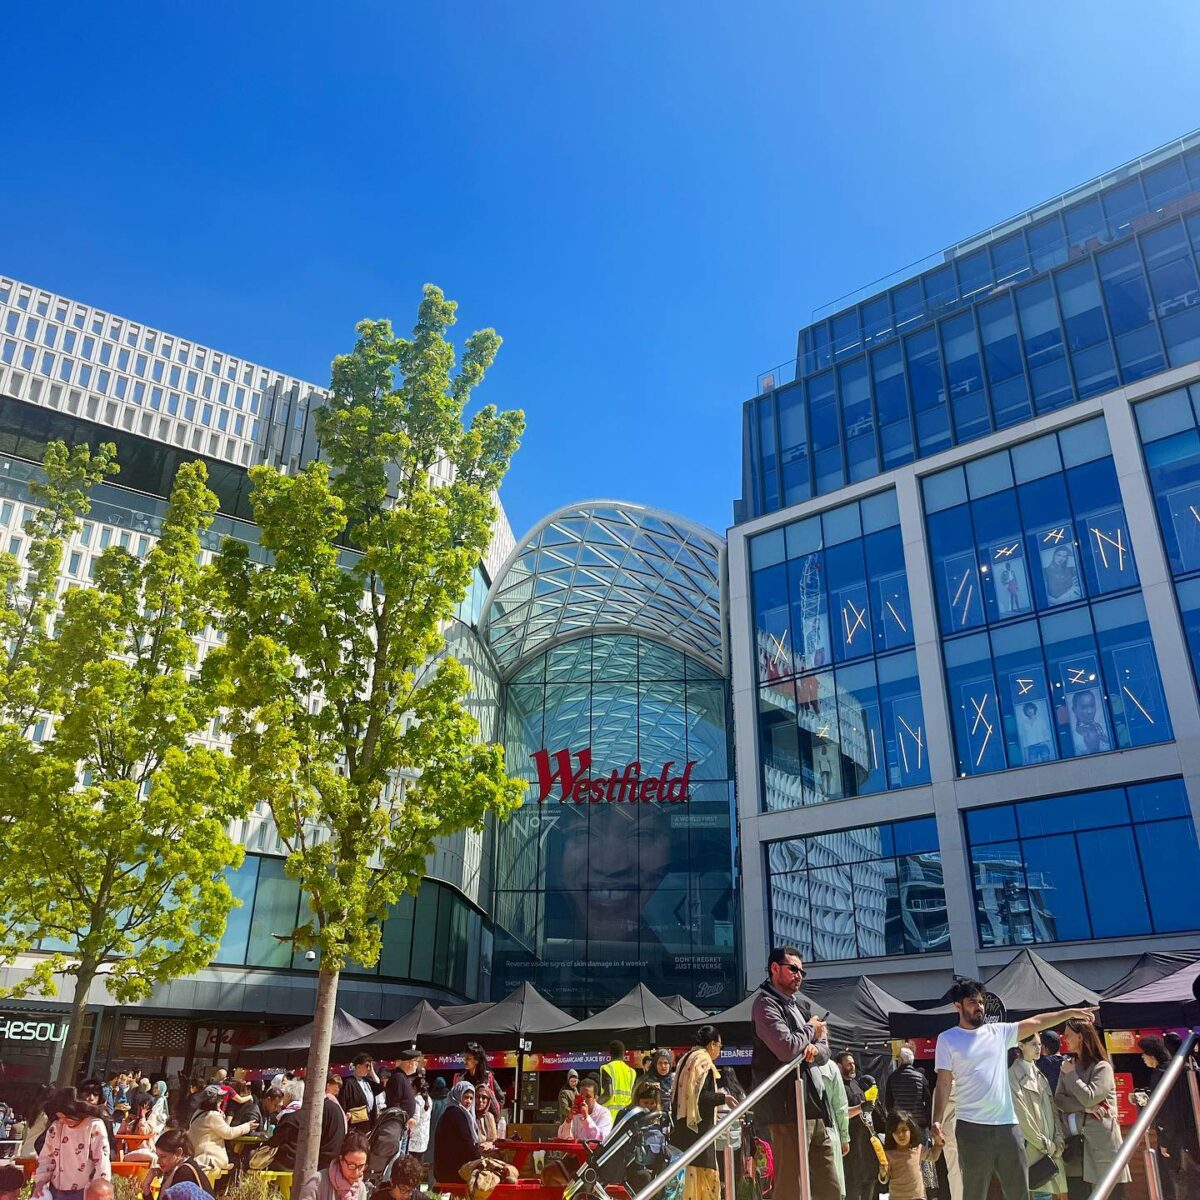 Westfield London named UK's leading shopping centre as it celebrates 10  years - Retail Gazette